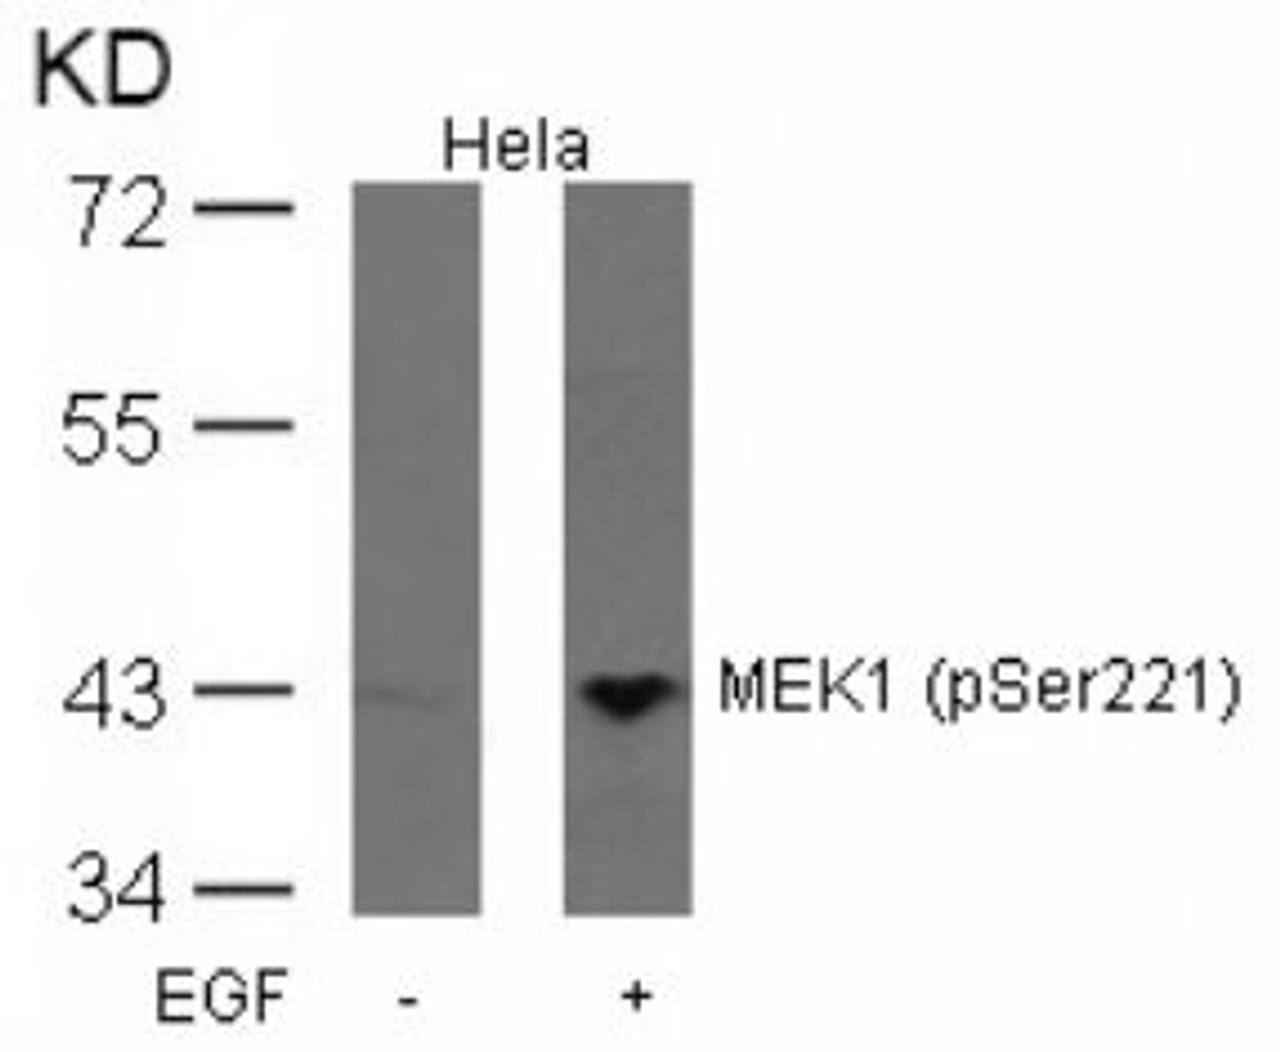 Western blot analysis of lysed extracts from HeLa cells untreated or treated with EGF using MEK1 (Phospho-Ser221) .